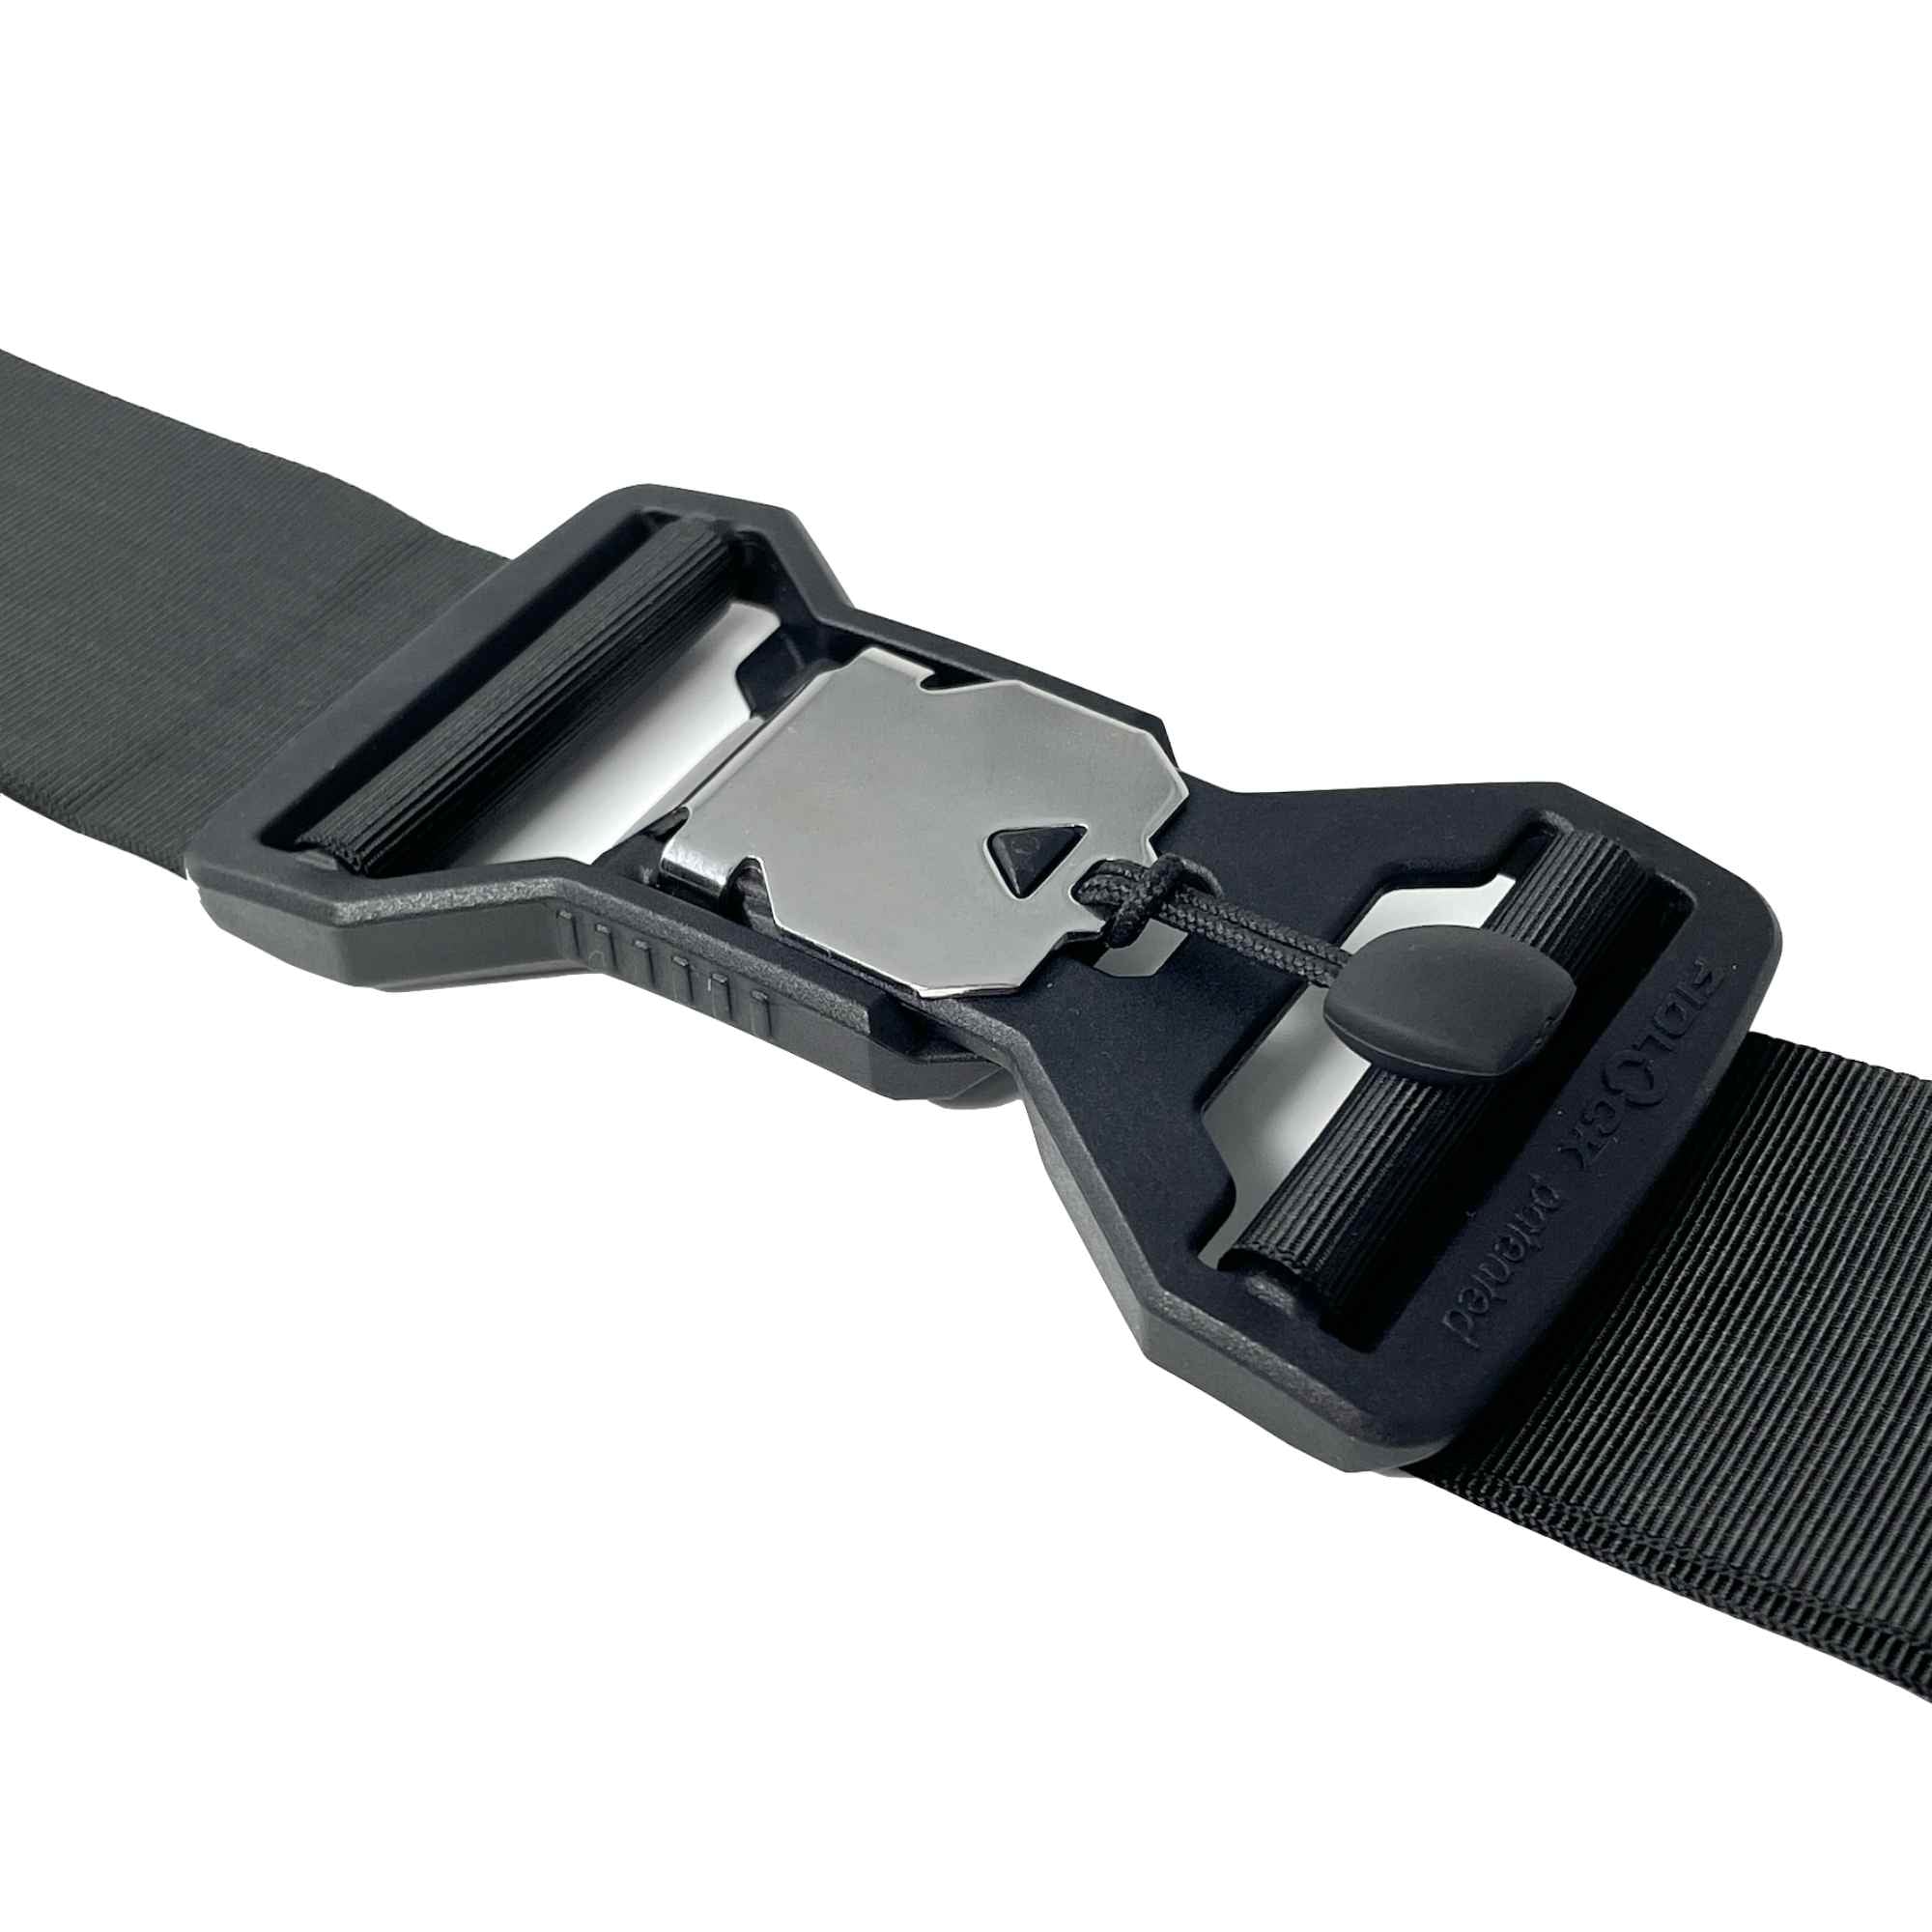 (Black)Andrew Nylon Strap With Buckle Fixing Strapping Belts Luggage Straps